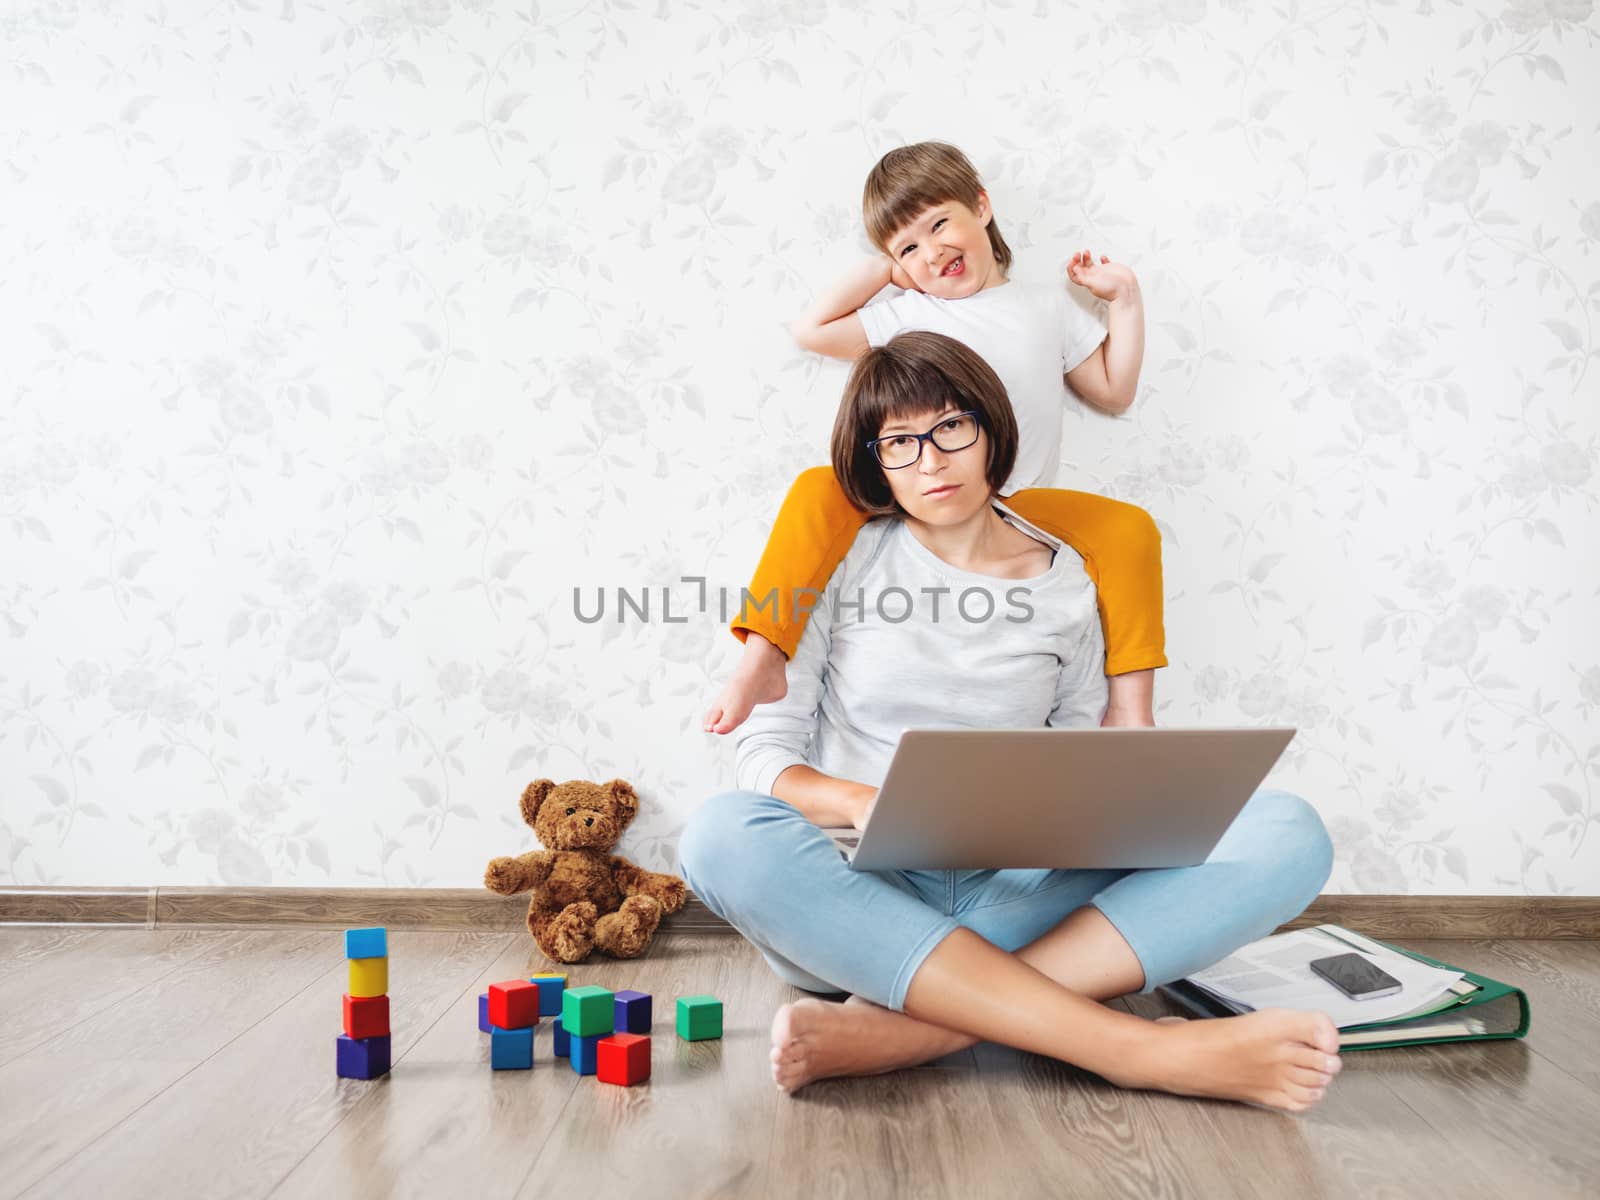 Mom and son at home. Mother works remotely with laptop, son sits by aksenovko